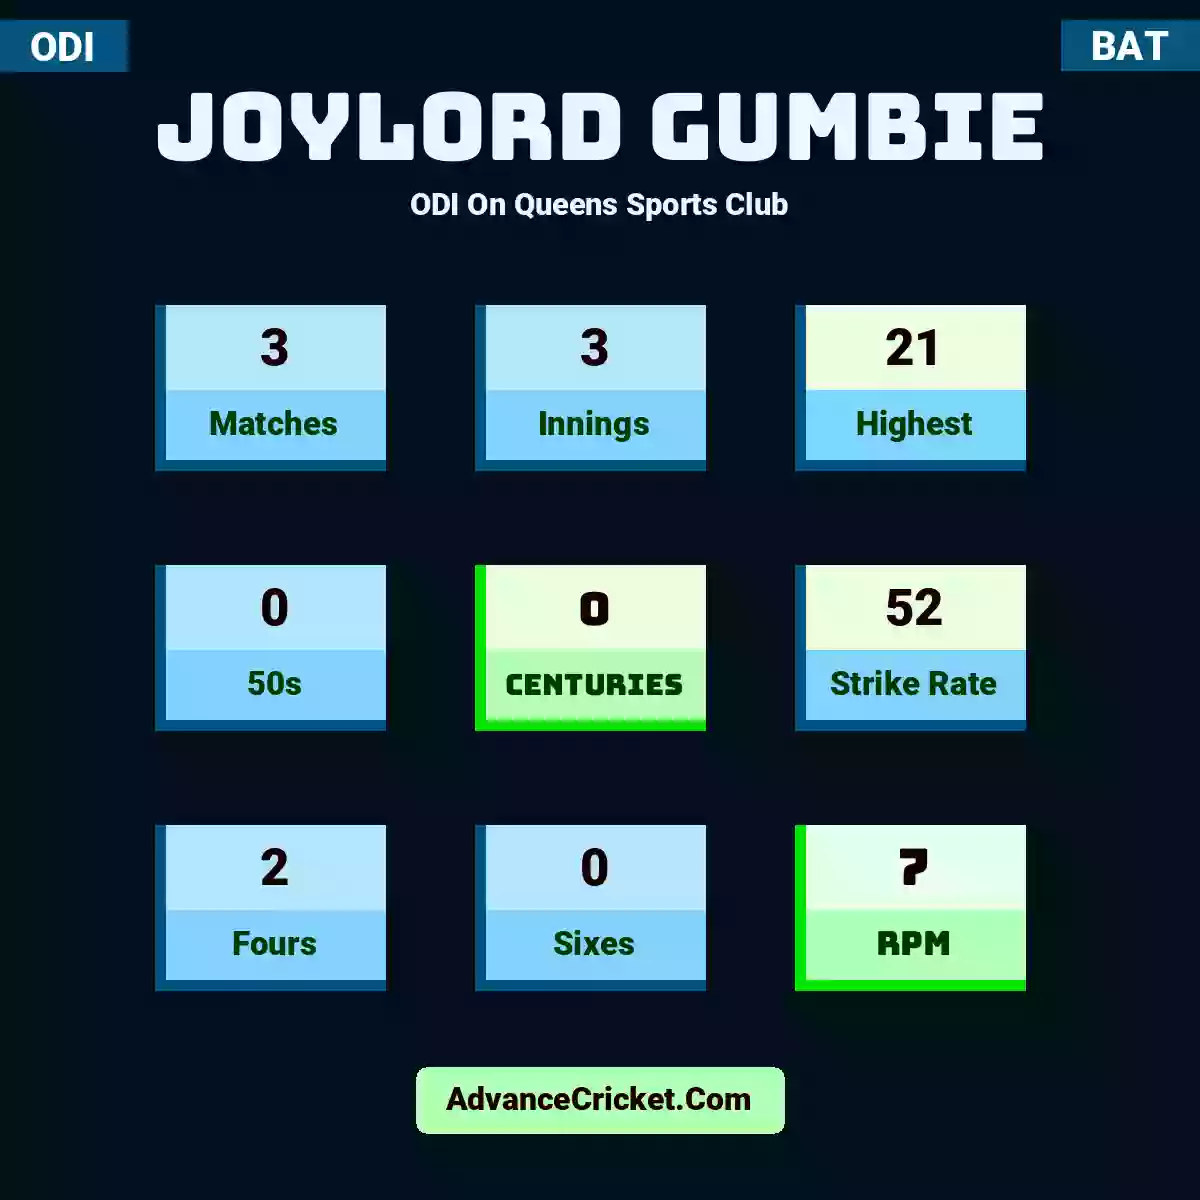 Joylord Gumbie ODI  On Queens Sports Club, Joylord Gumbie played 3 matches, scored 21 runs as highest, 0 half-centuries, and 0 centuries, with a strike rate of 52. J.Gumbie hit 2 fours and 0 sixes, with an RPM of 7.